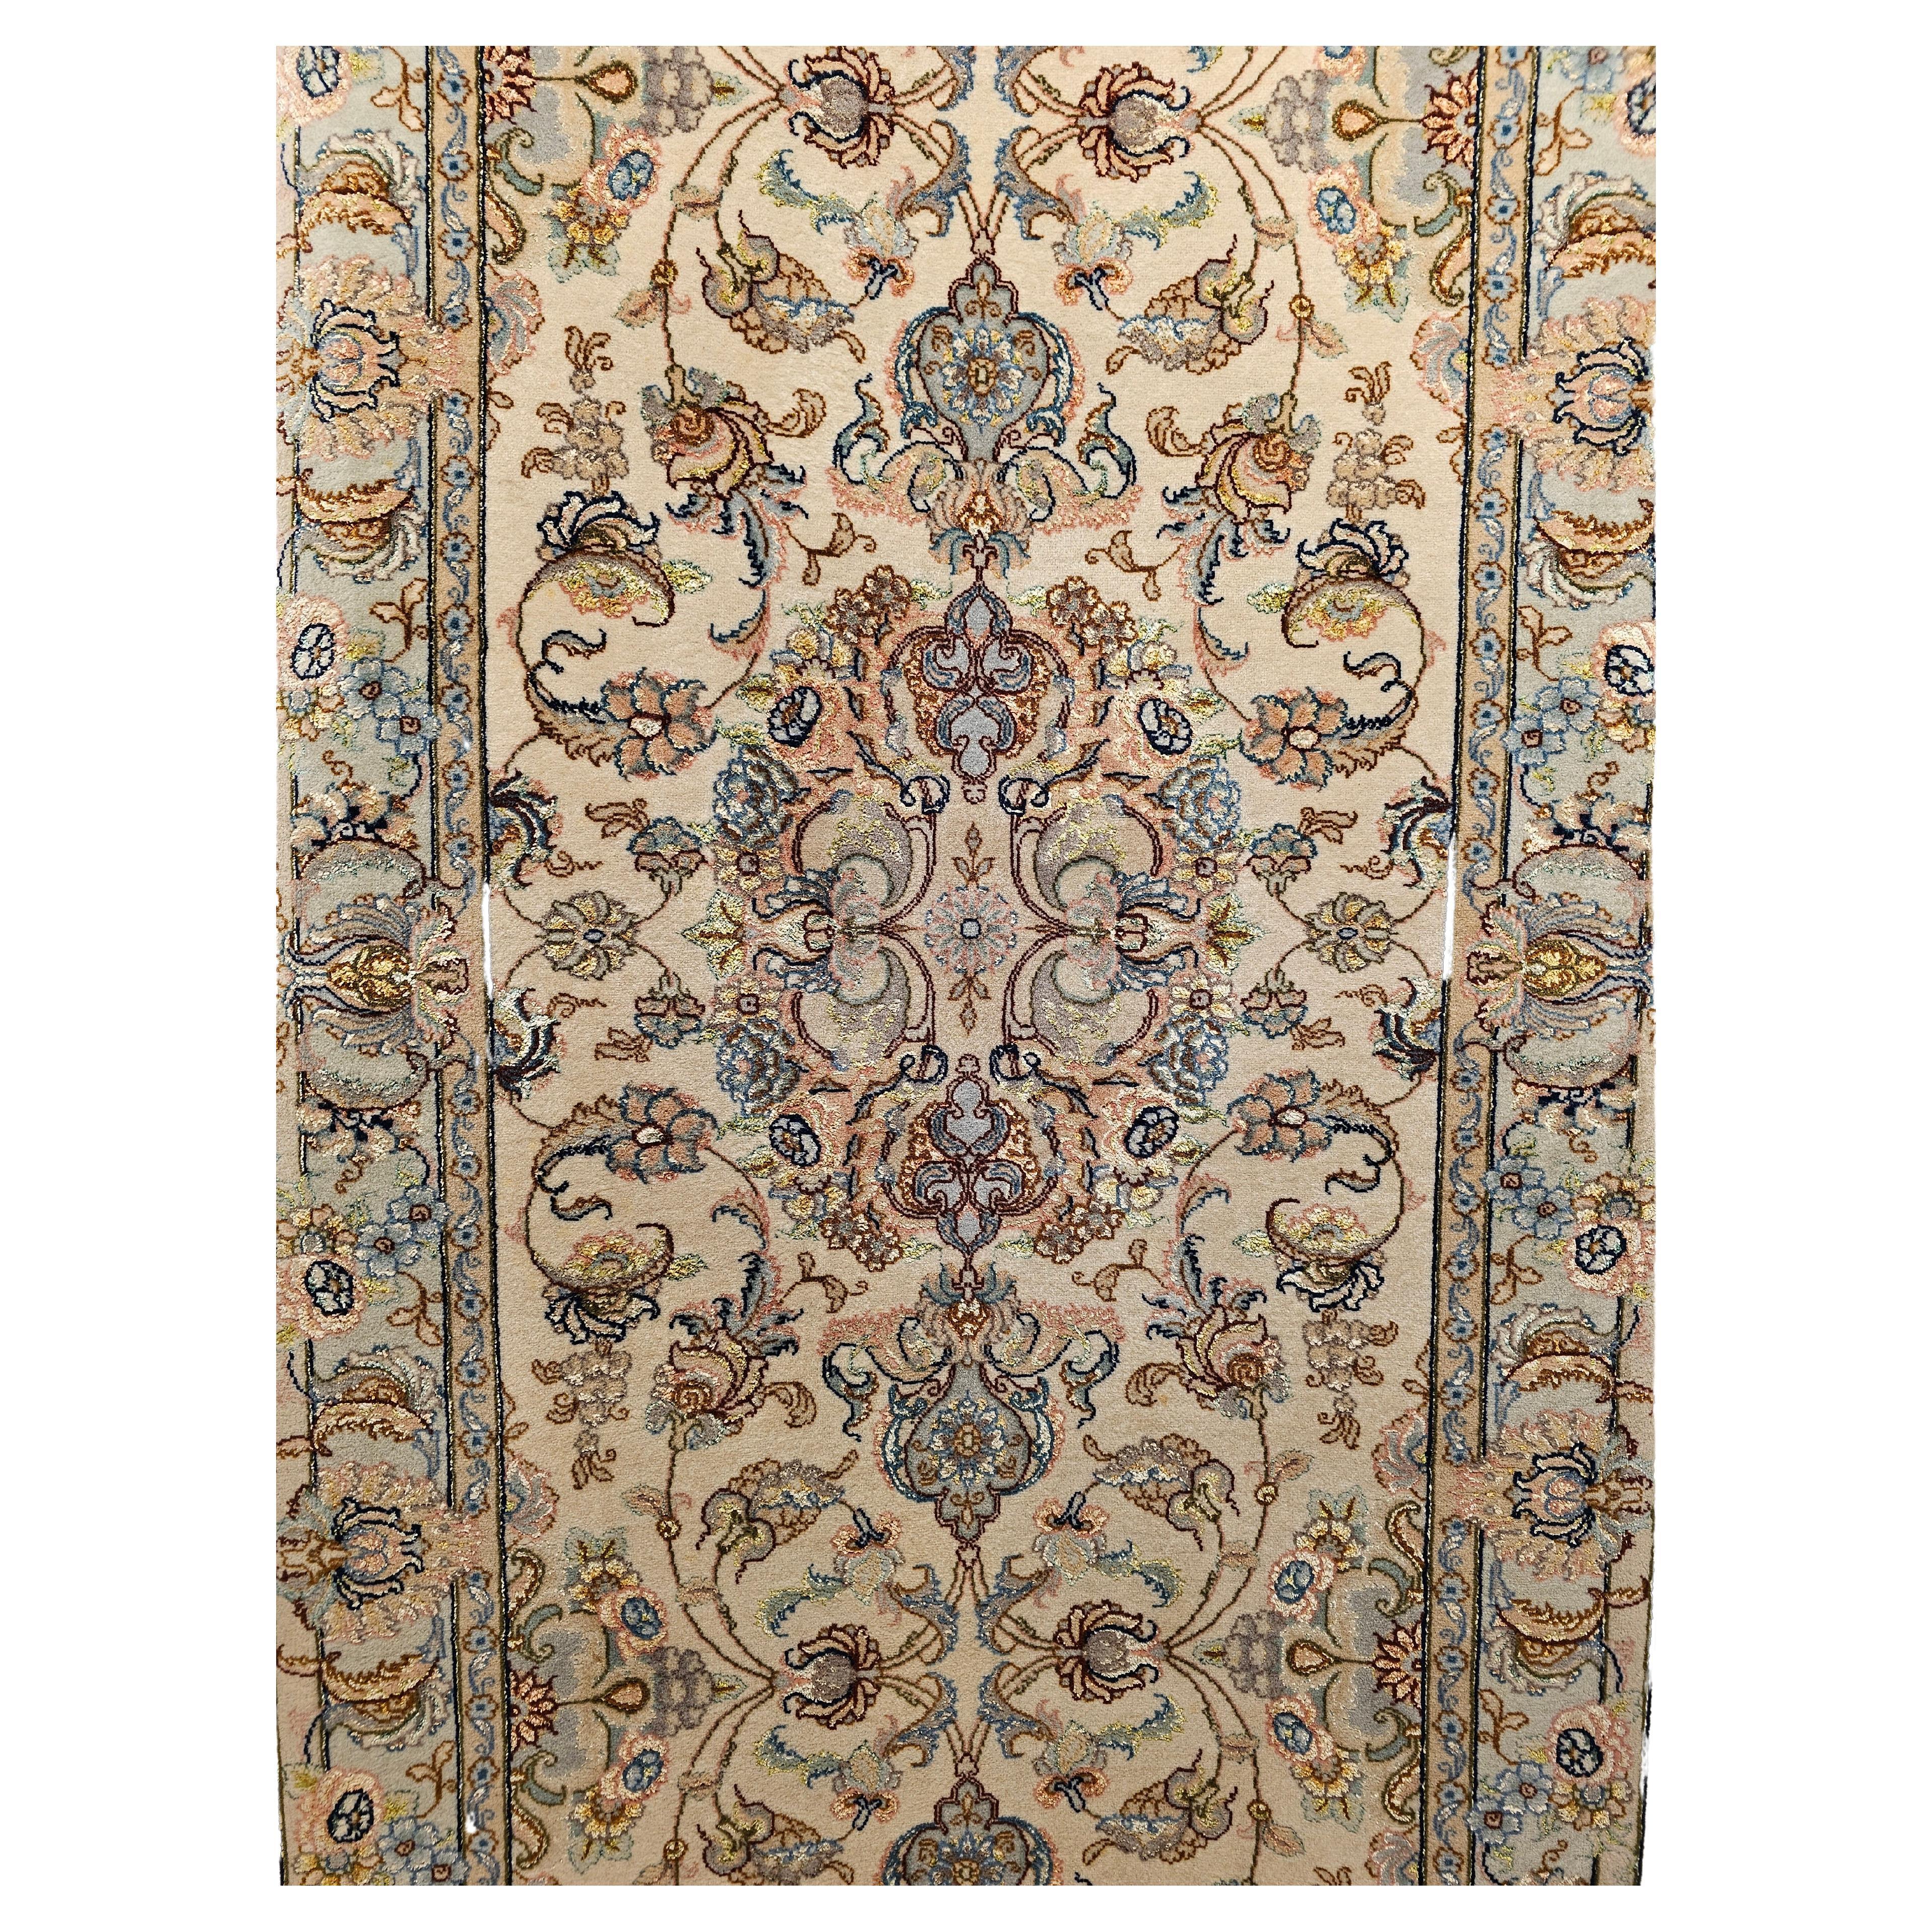 A beautiful and elegant Persian Tabriz runner in a floral pattern with medallions in ivory, pale green with silk highlights from the late 1900s.  The rug has a wool pile with a cotton foundation with extensive use of silk for highlighting.    The